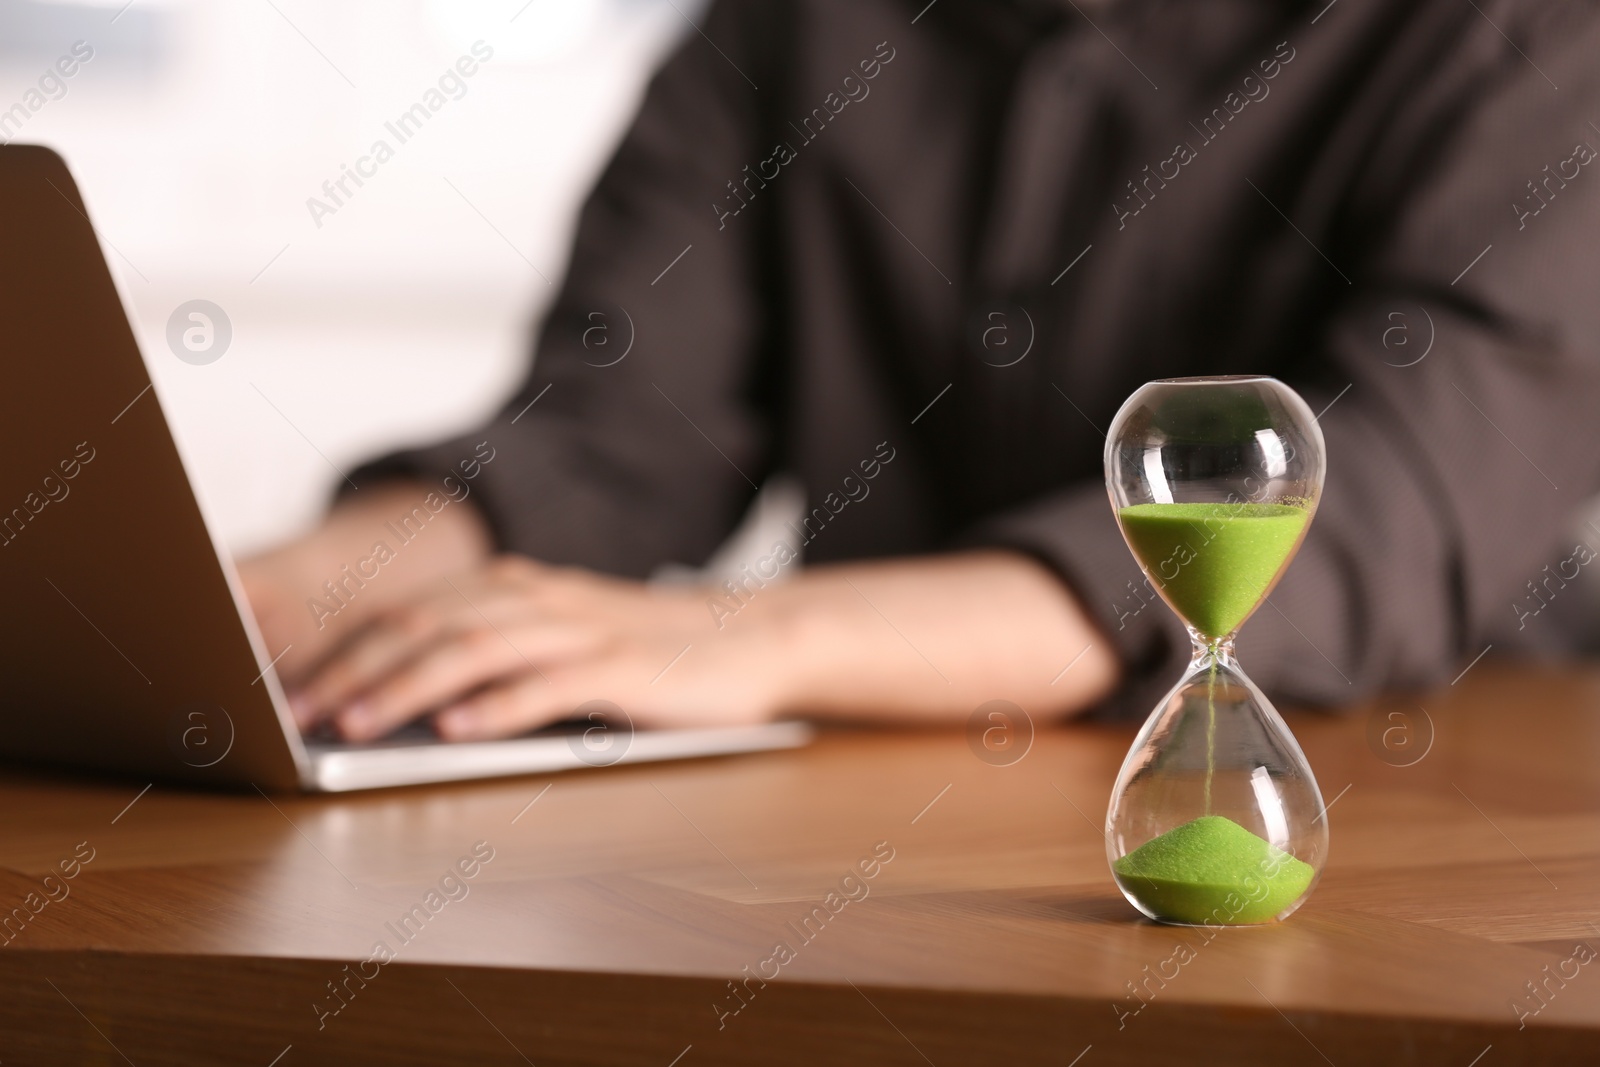 Photo of Hourglass with flowing sand on wooden table, selective focus. Man using laptop indoors